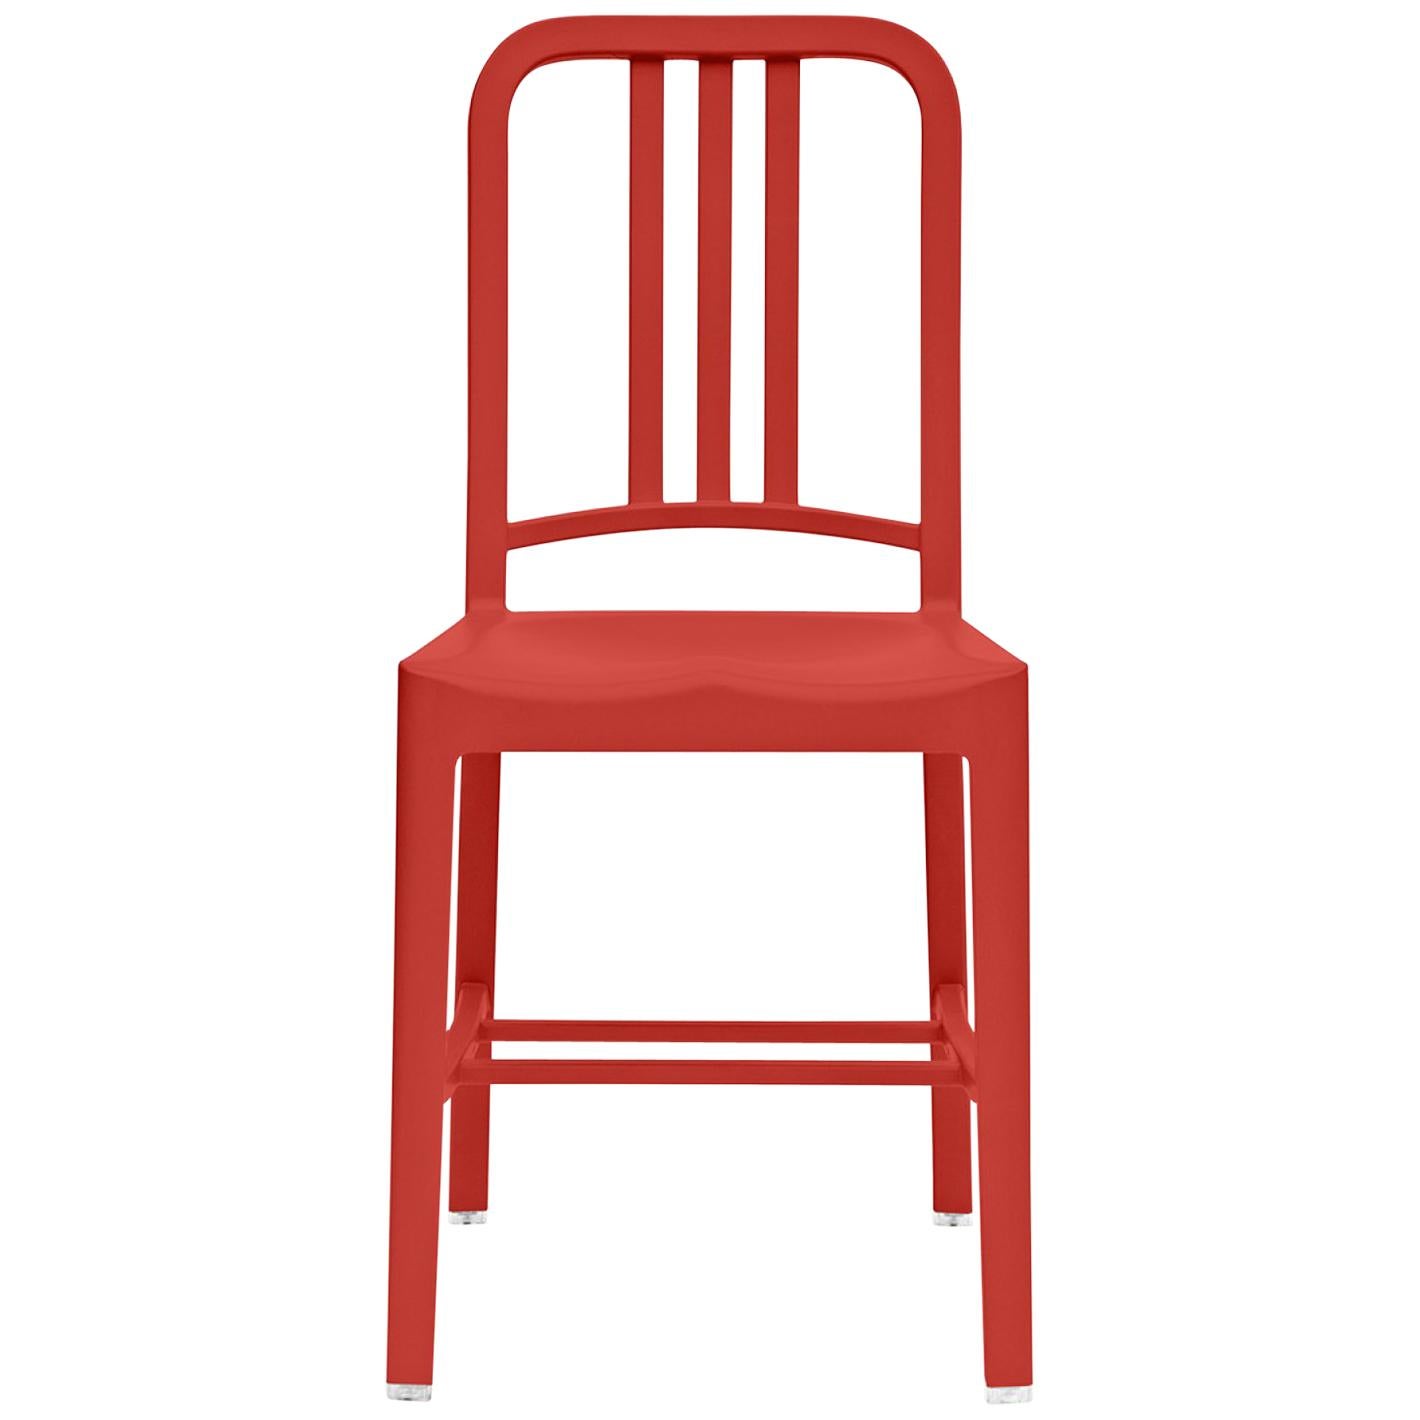 Emeco 111 Navy Chair in Red by Coca-Cola